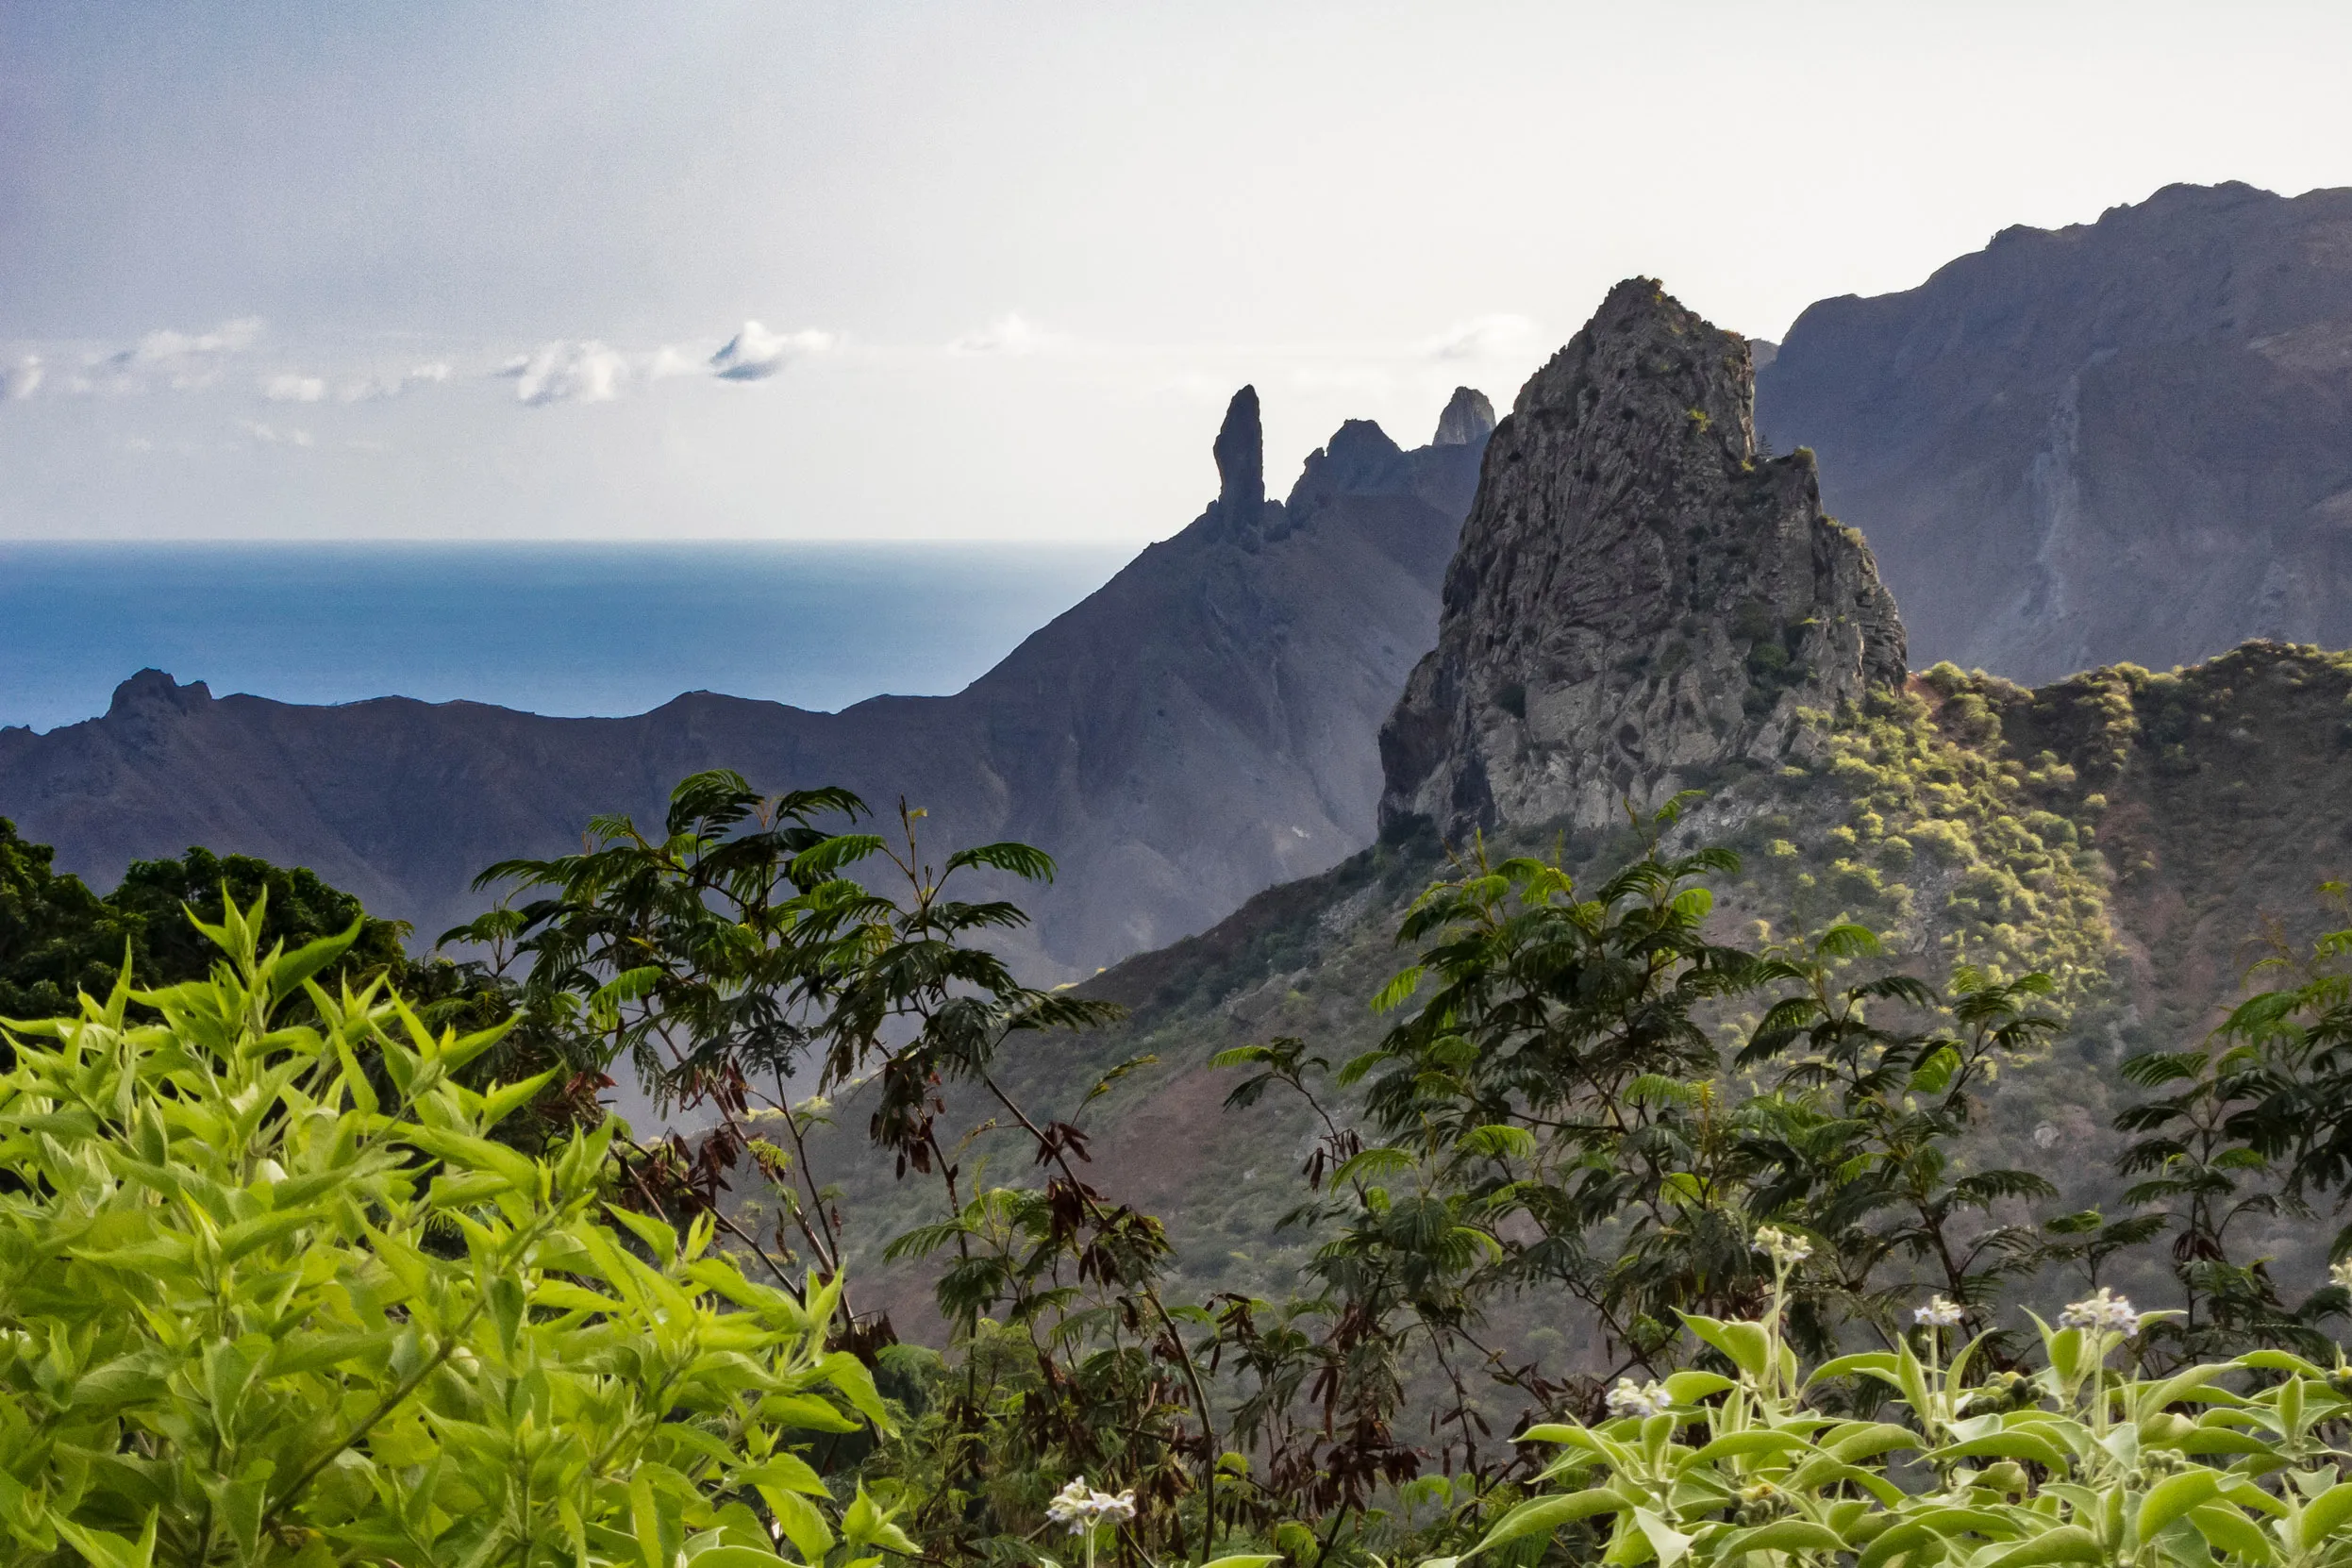 The view of the mountains at St Helena Island surrounded by the tops of leafy green trees.